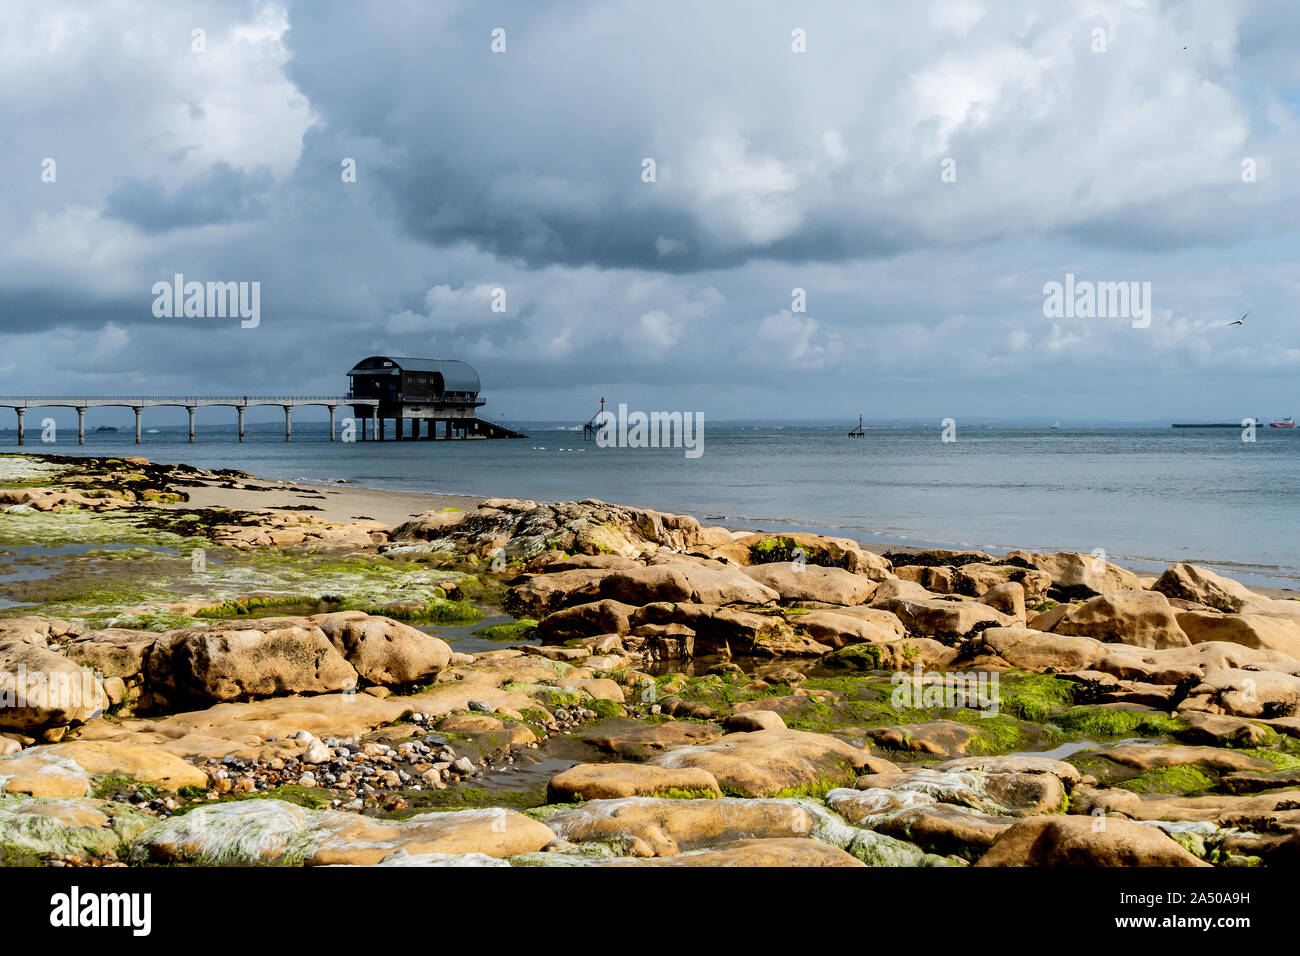 The Bembridge Lifeboat Station is an RNLI station on the Isle of Wight. Shown at low tide revealing the colourful foreshore at low tide. Stock Photo